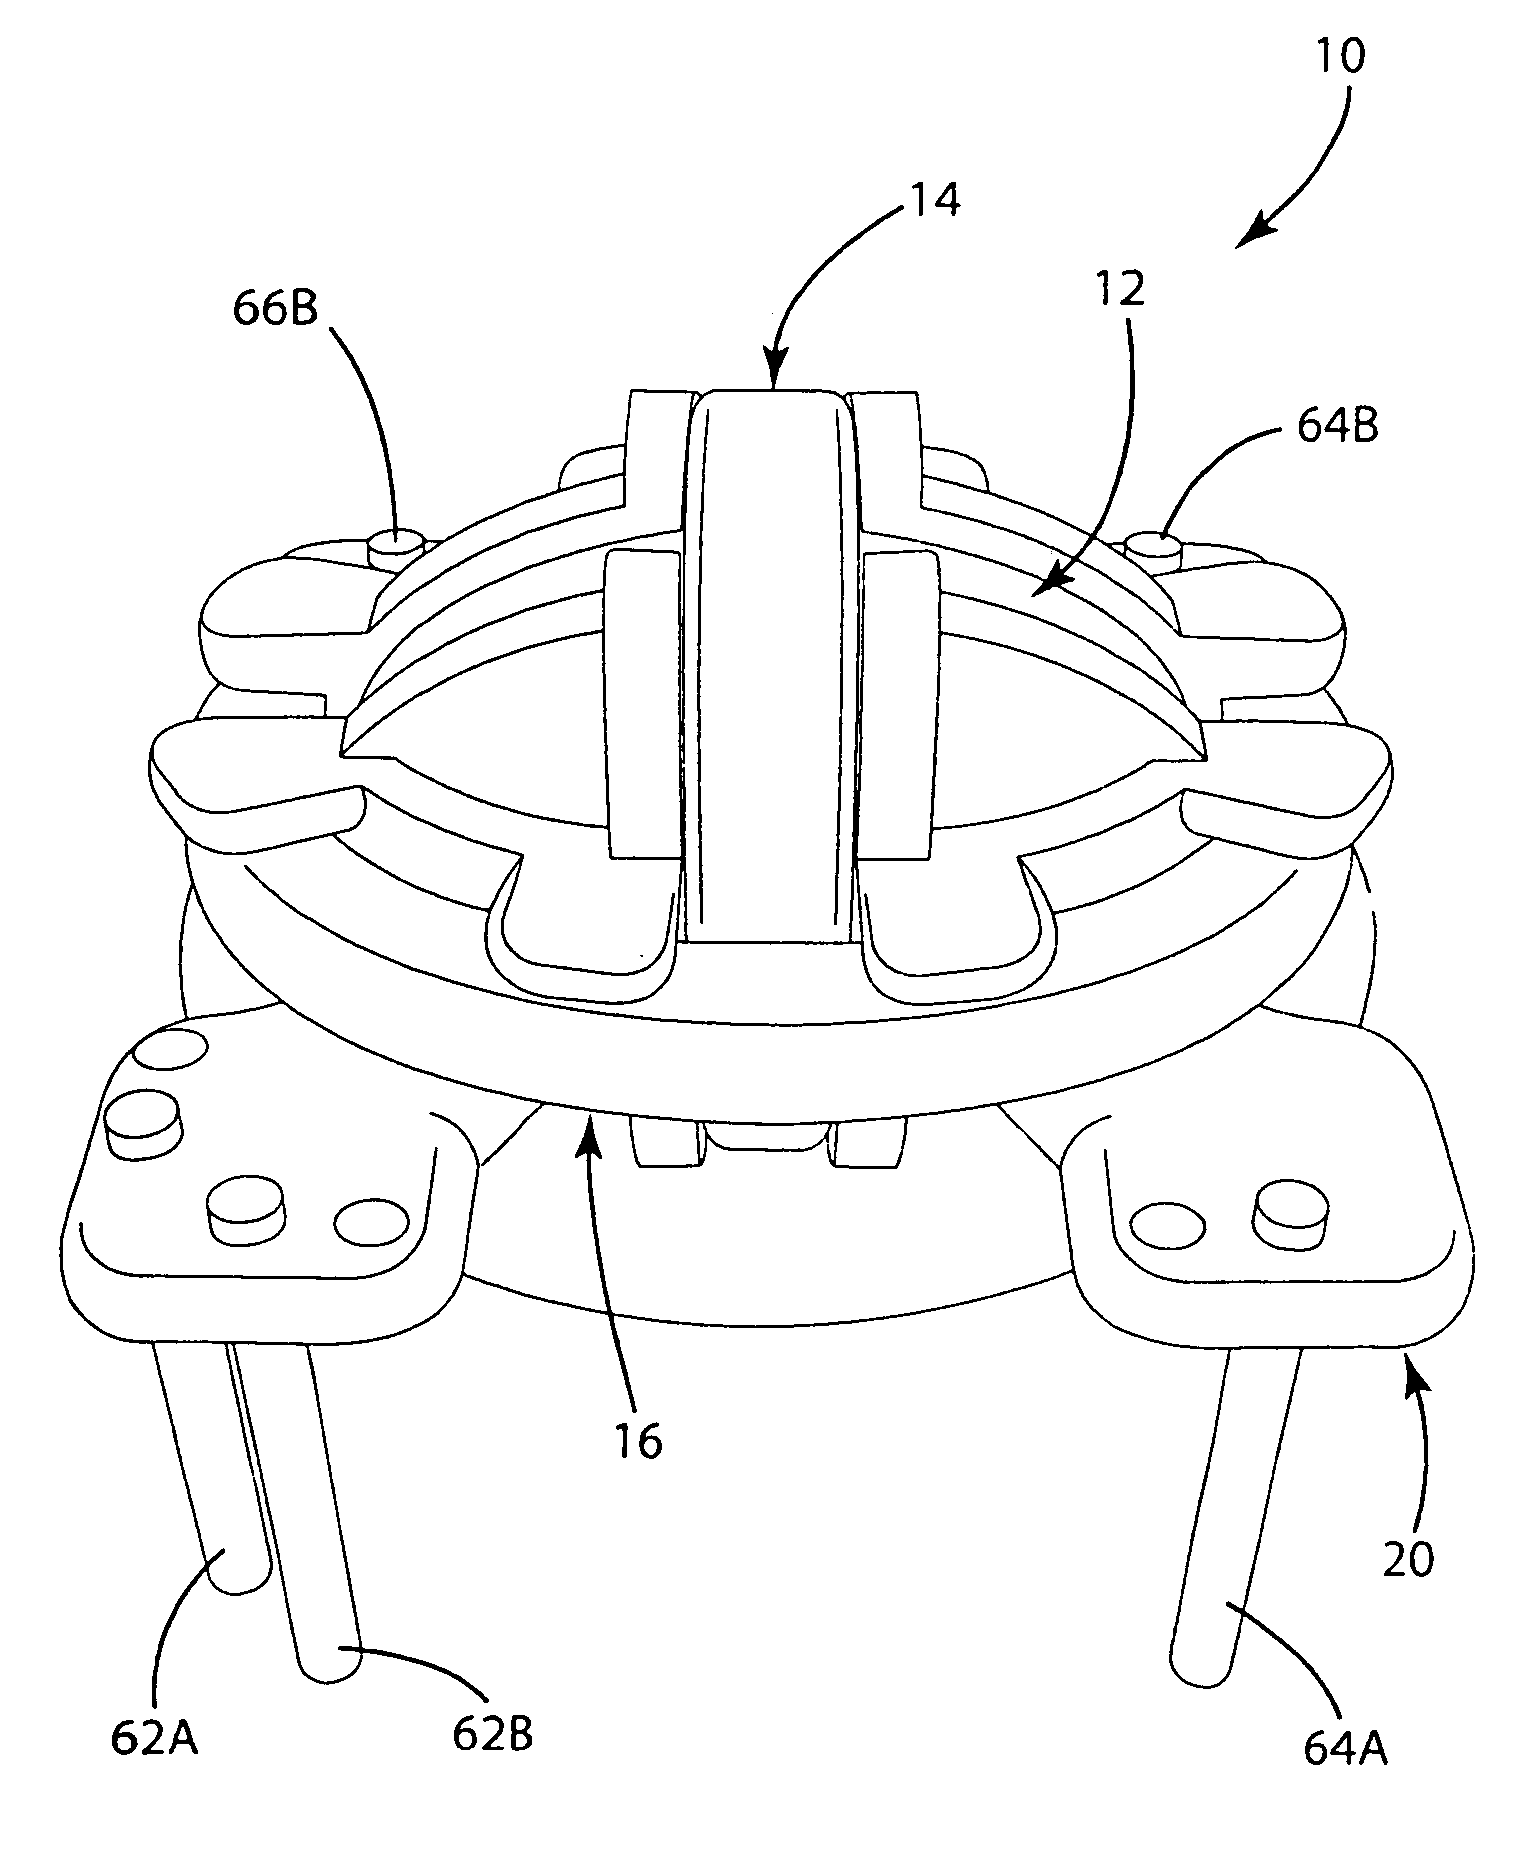 Inductive coil assembly